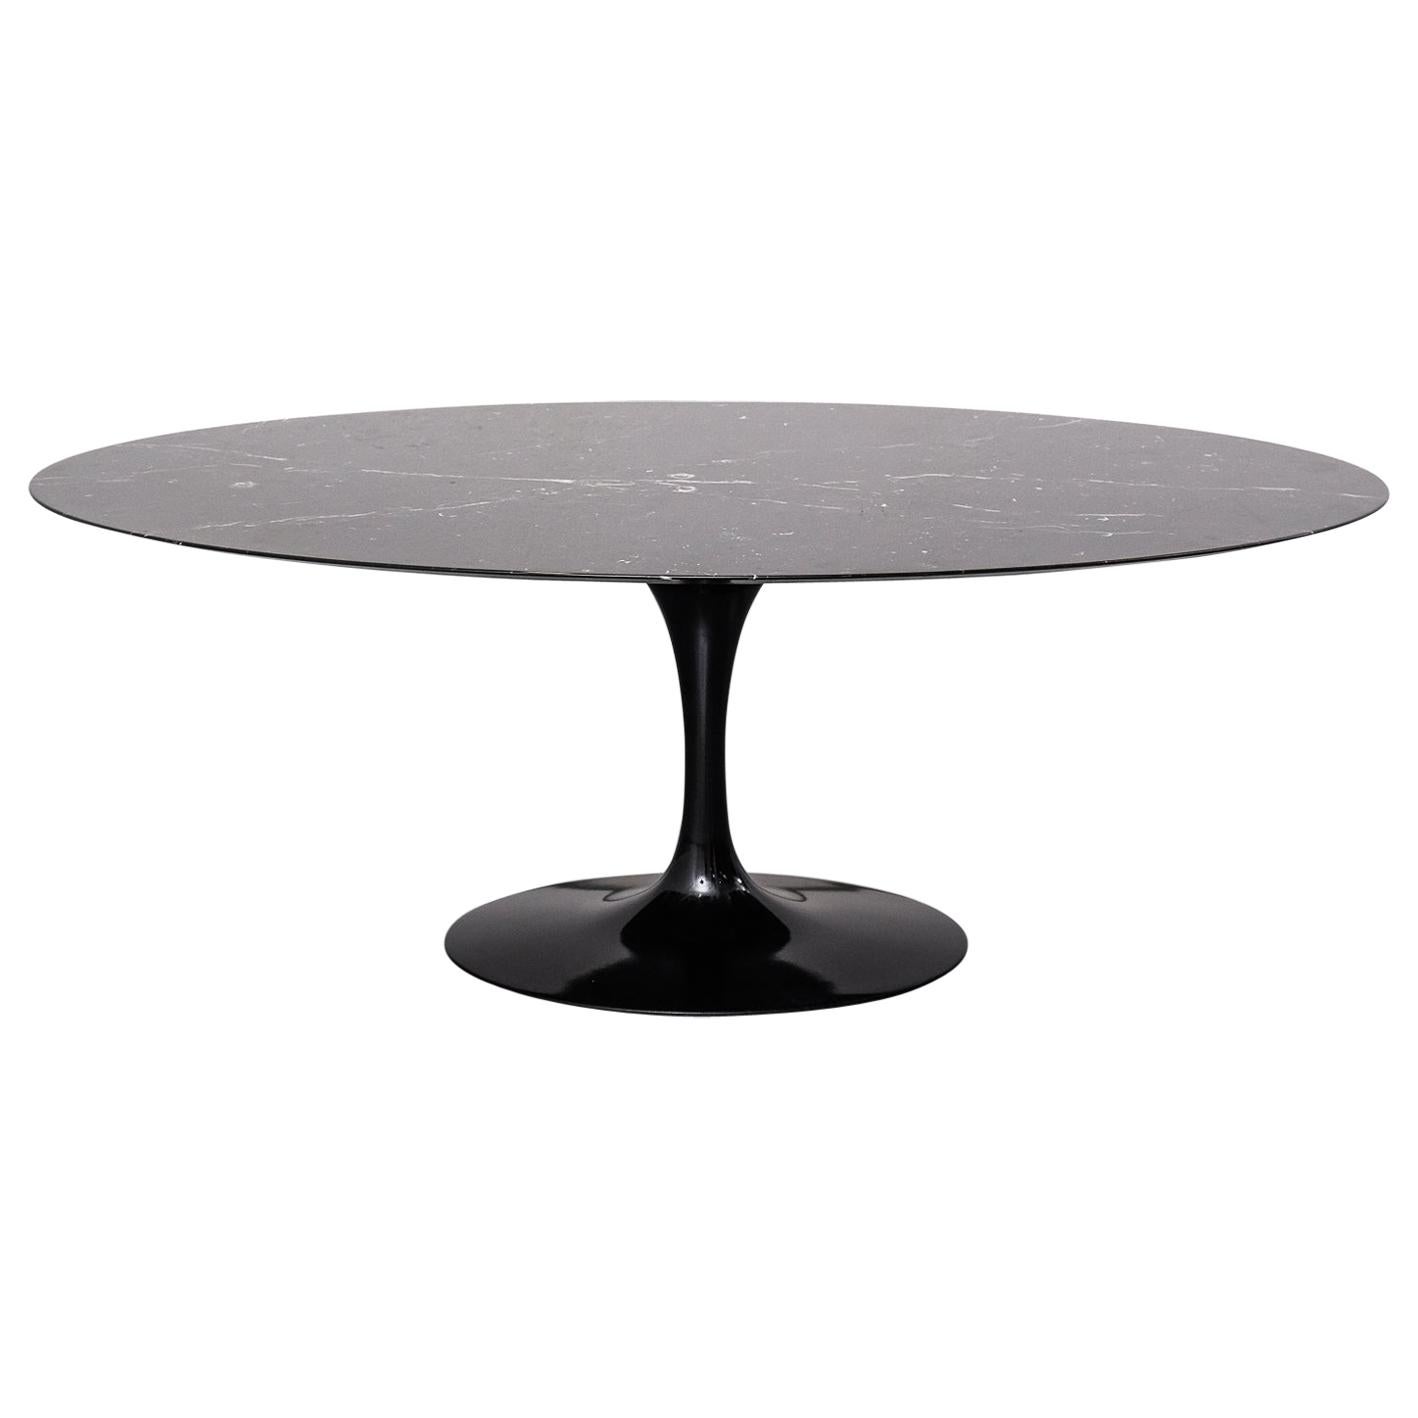 Oval "Tulip" Dining Table with Black Marble Top by Eero Saarinen for Knoll